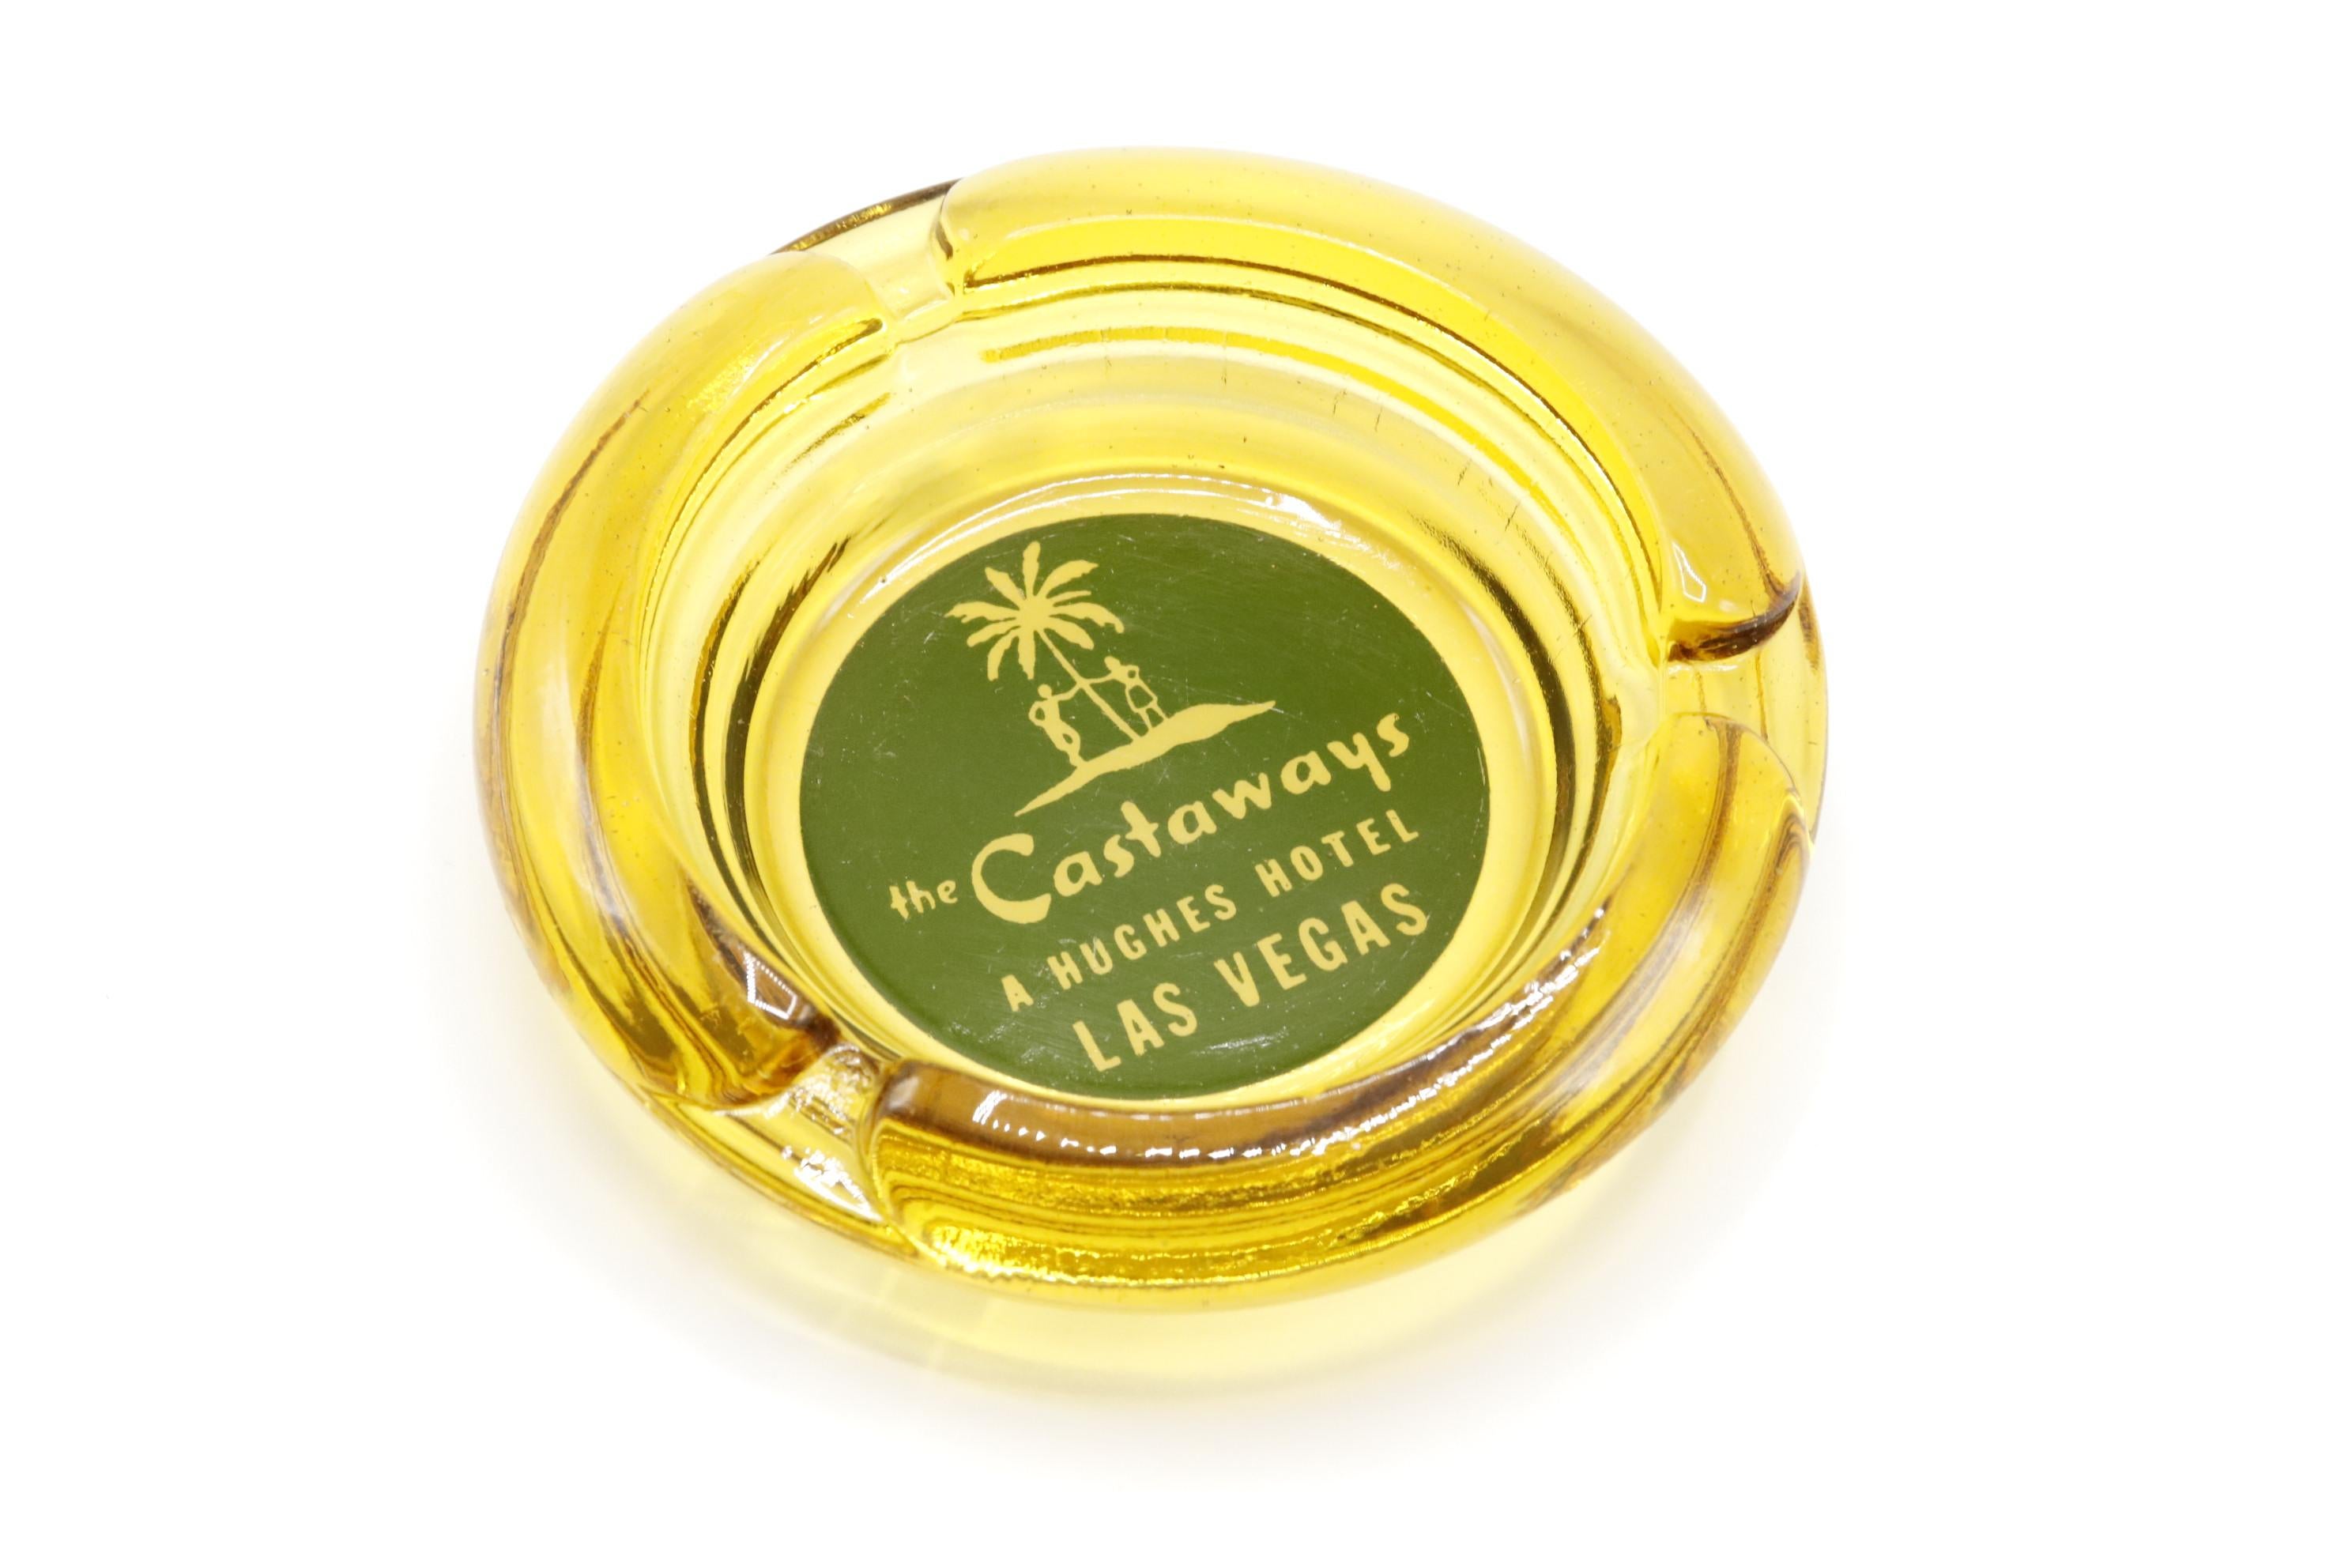 A yellow glass ashtray from The Castaways Hotel, a hotel and casino in Paradise, Las Vegas, Nevada. The center is printed with a green circle branded with the Castaways logo. The hotel, permanently closed in 1987, was opened in 1963 and purchased in